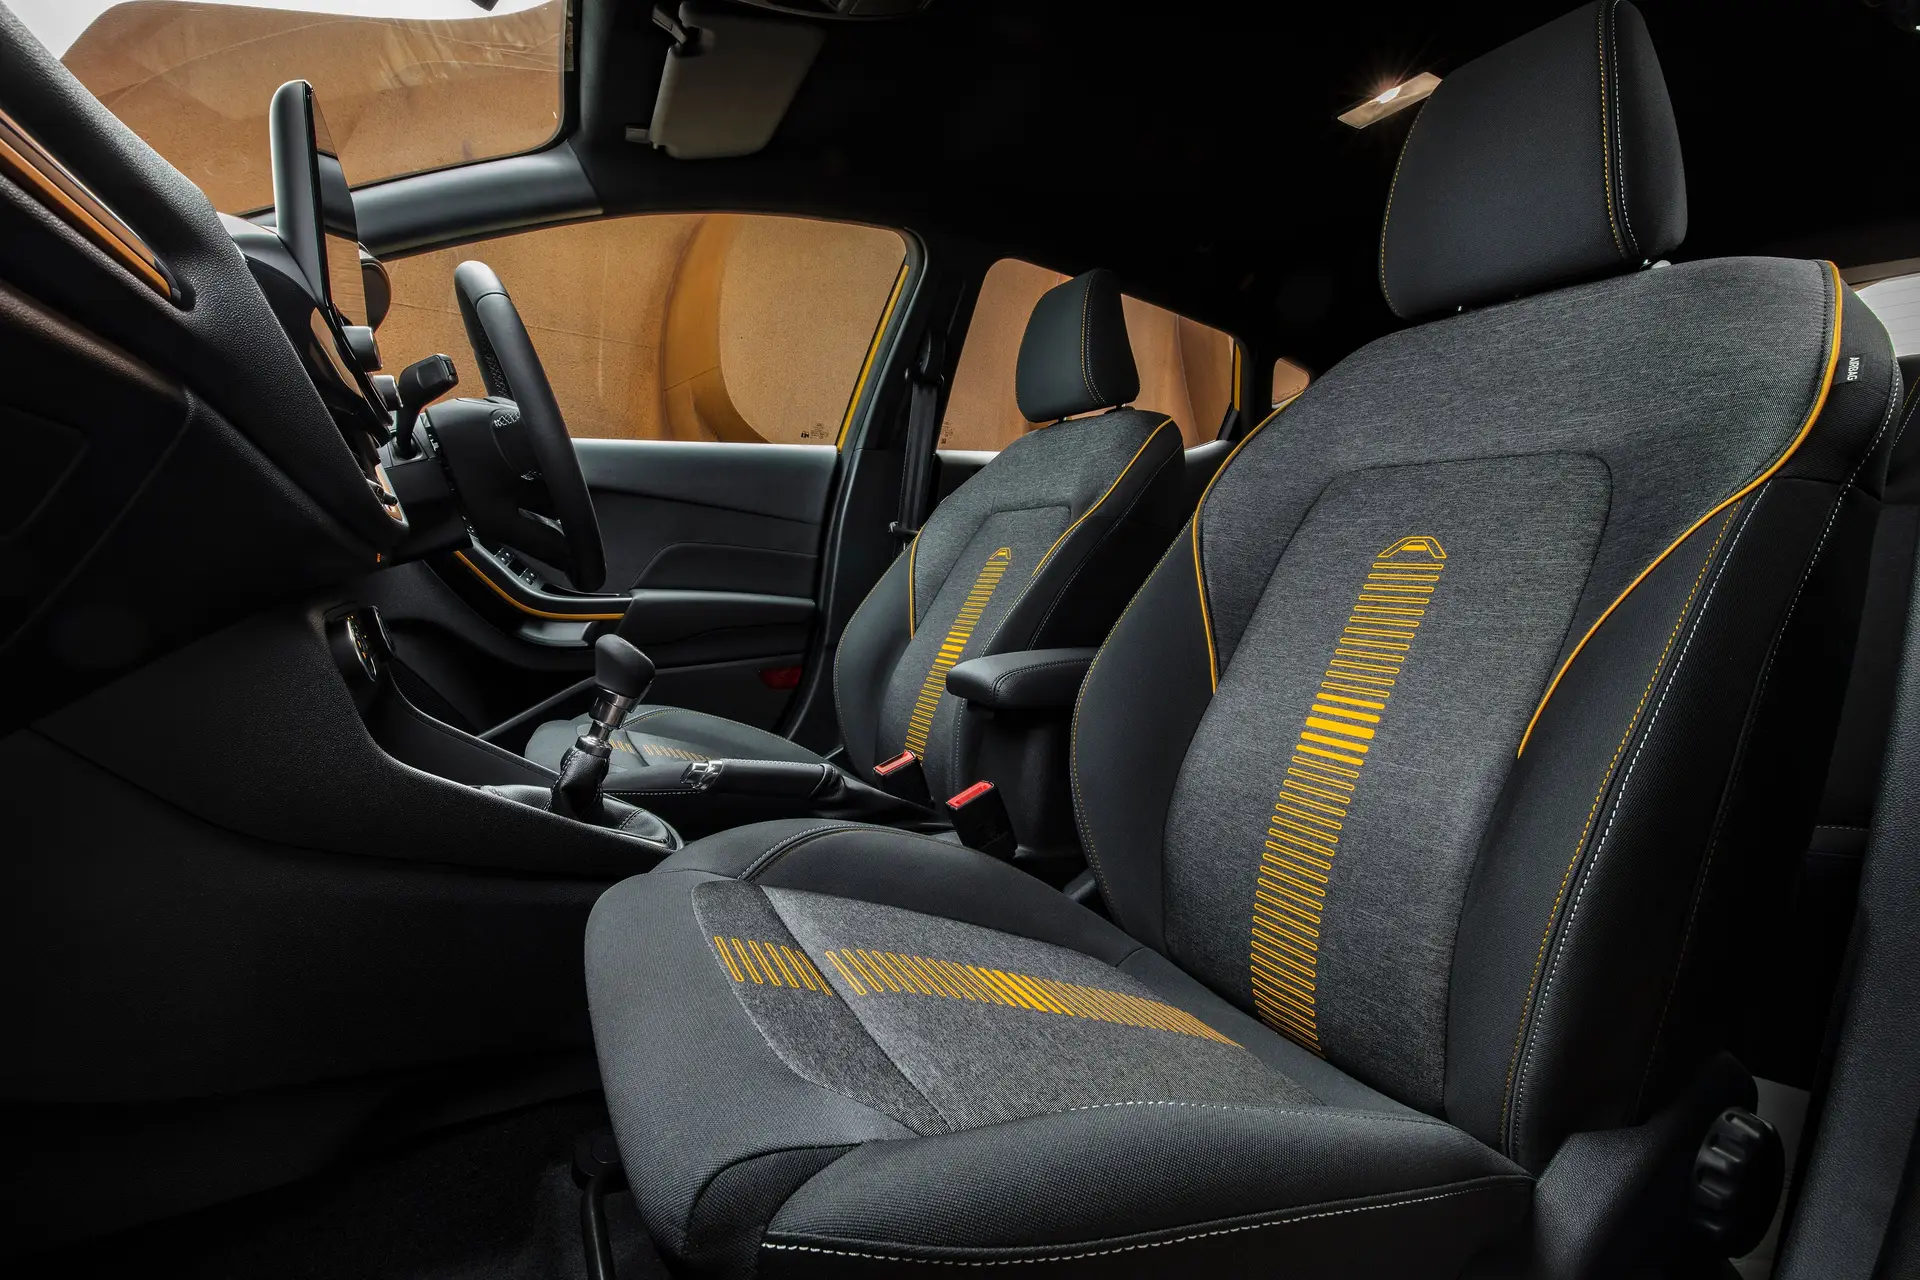 Ford Fiesta Active seats